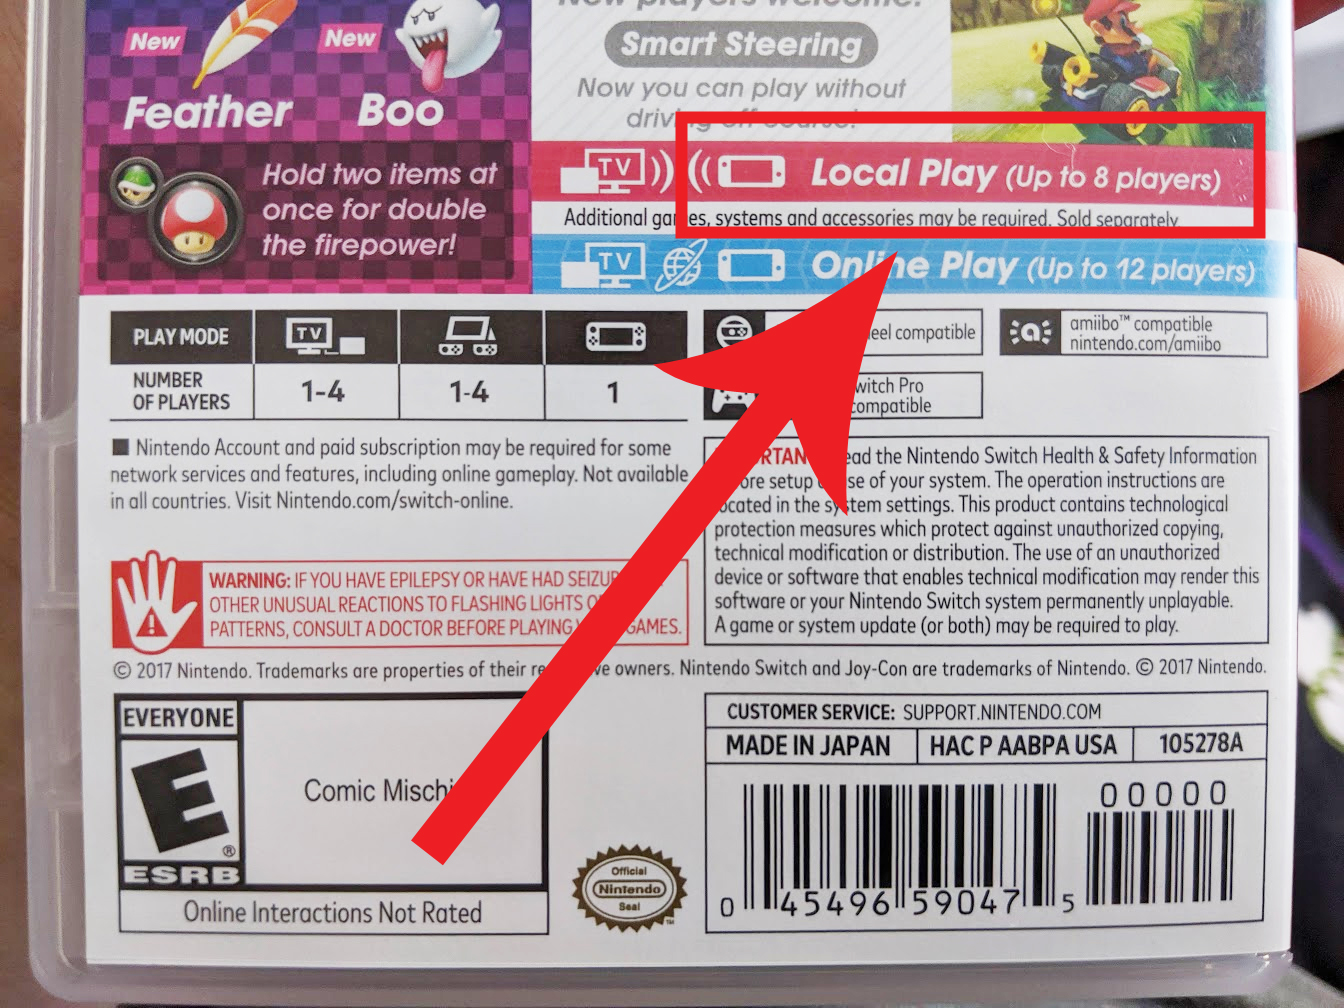 Points to the local game section on the back of the Mario Kart 8 Deluxe box